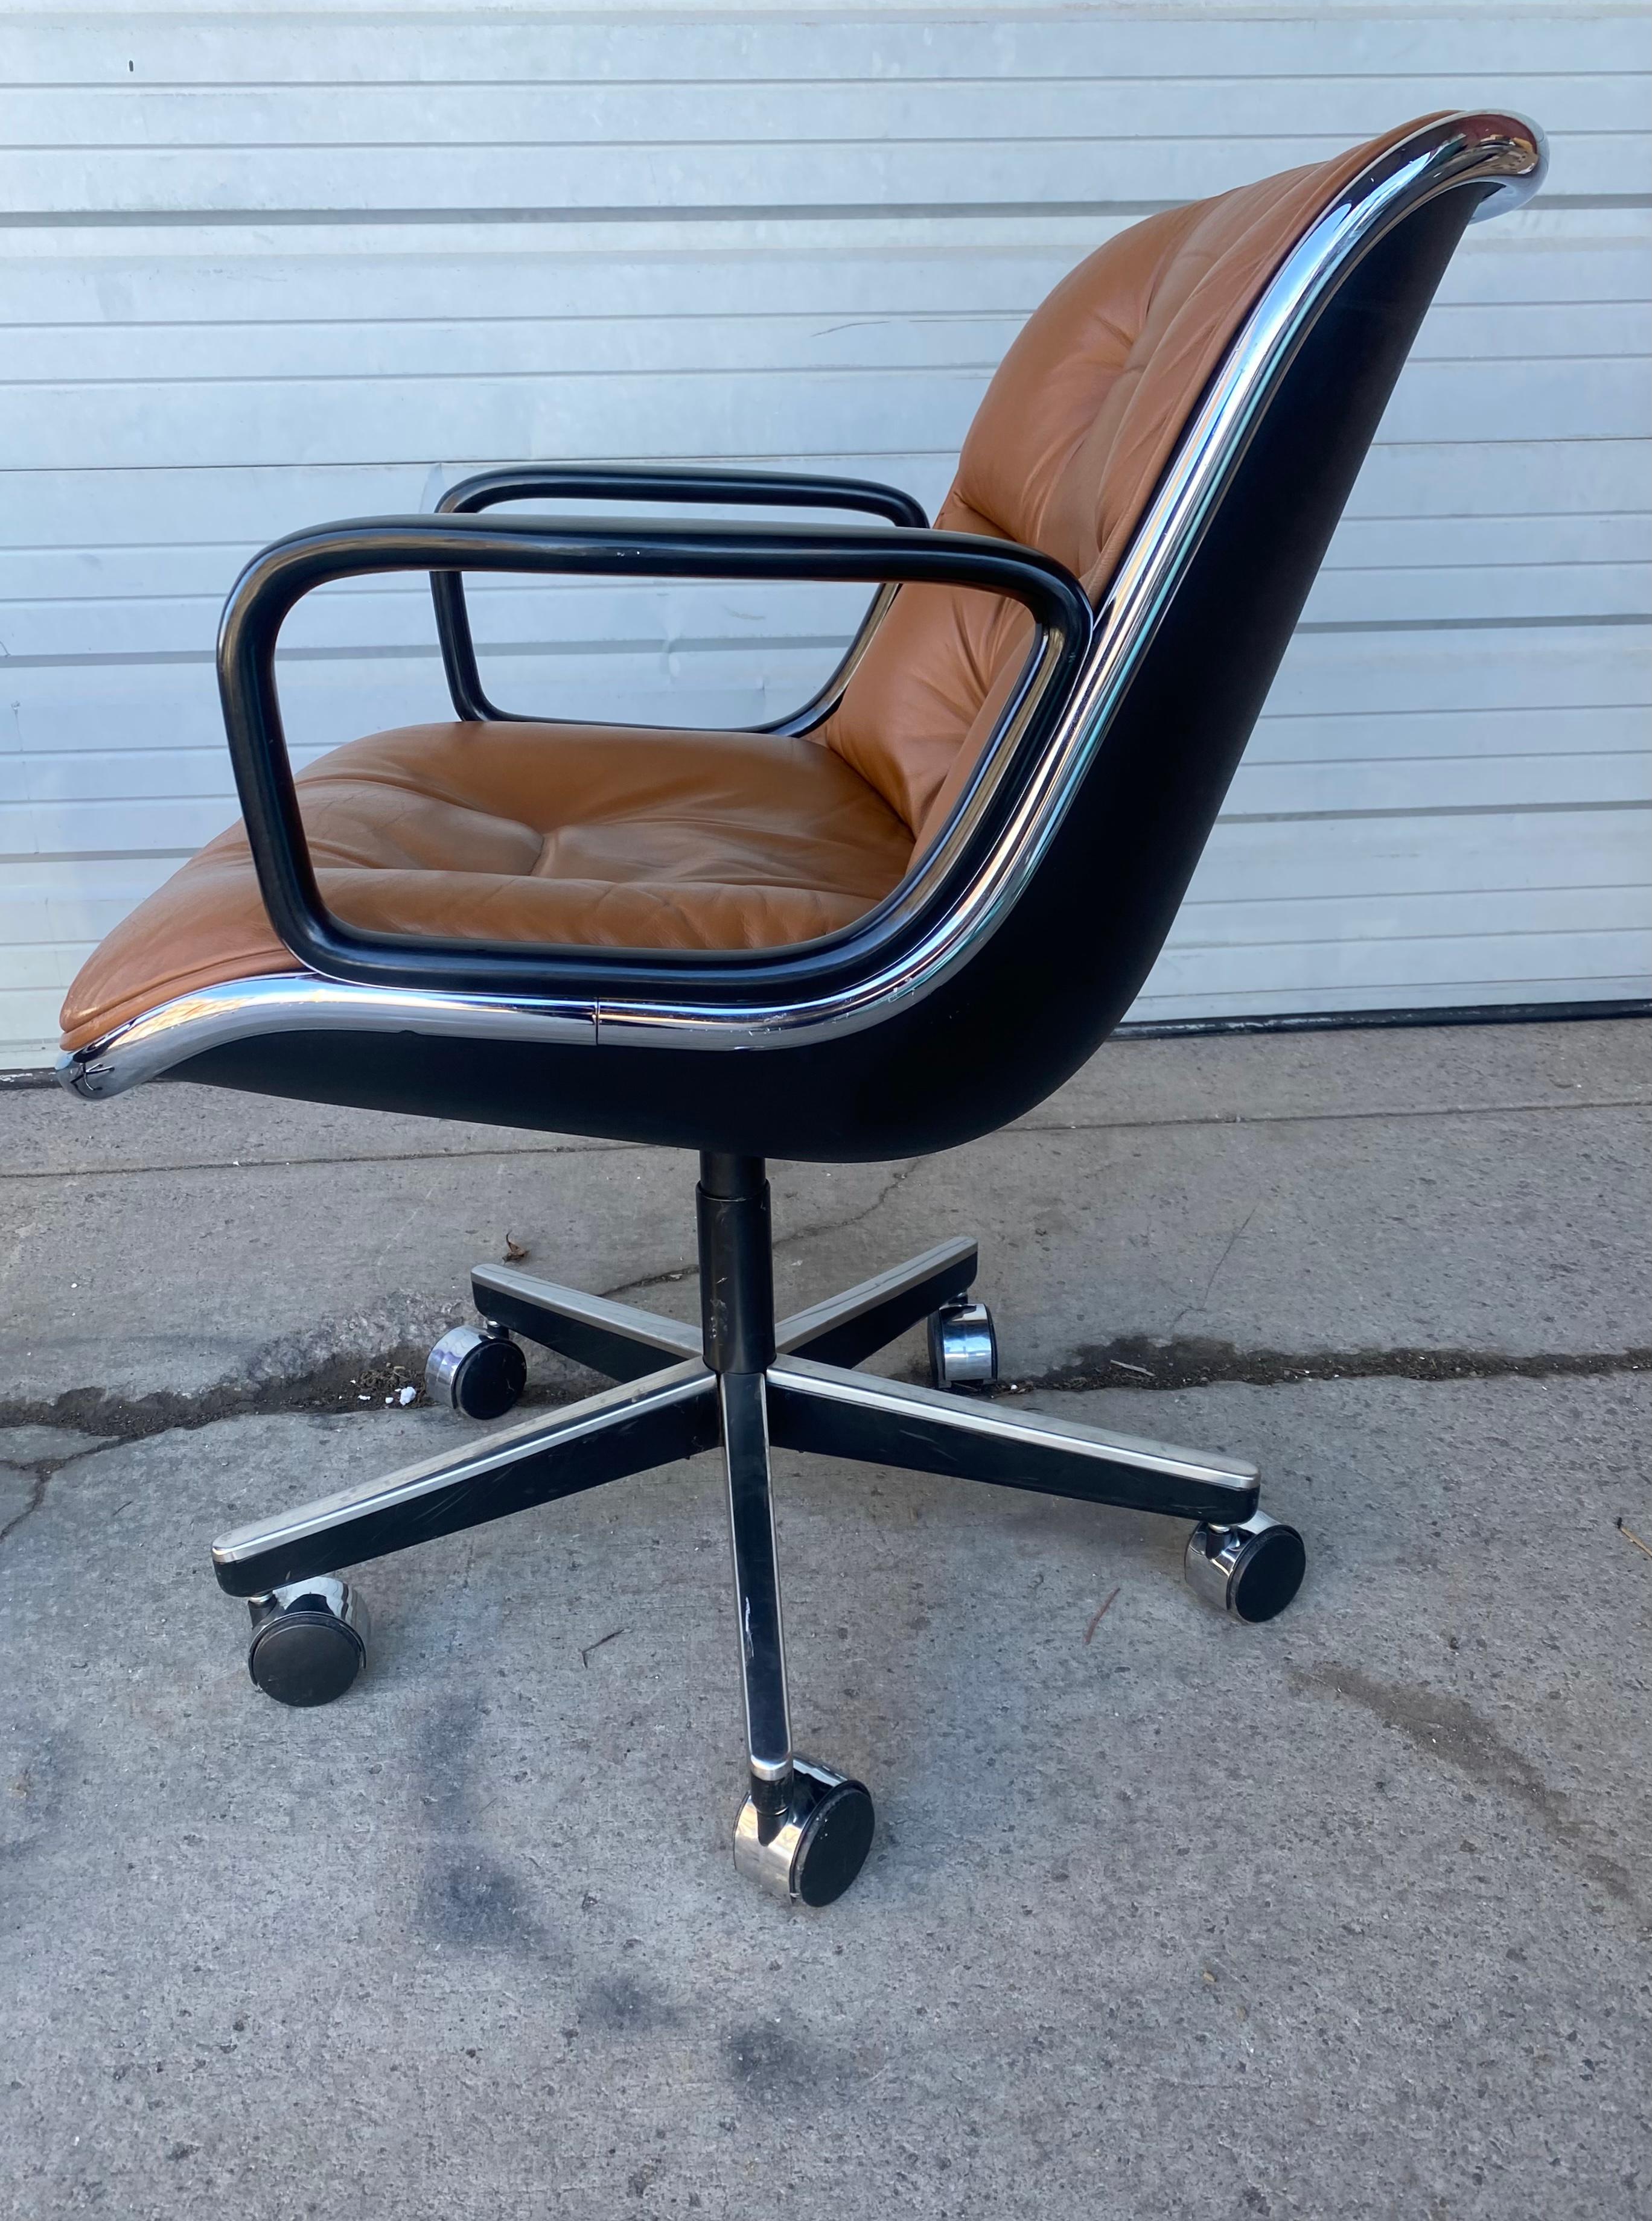 Classic PAIR of vintage original brown leather Pollock desk chairs designed by Charles Pollack for Knoll. Sold seperately!! Features original brown leather in very good original condition,, Tilt / swivel,, 5- star base on castors.. Hand delivery